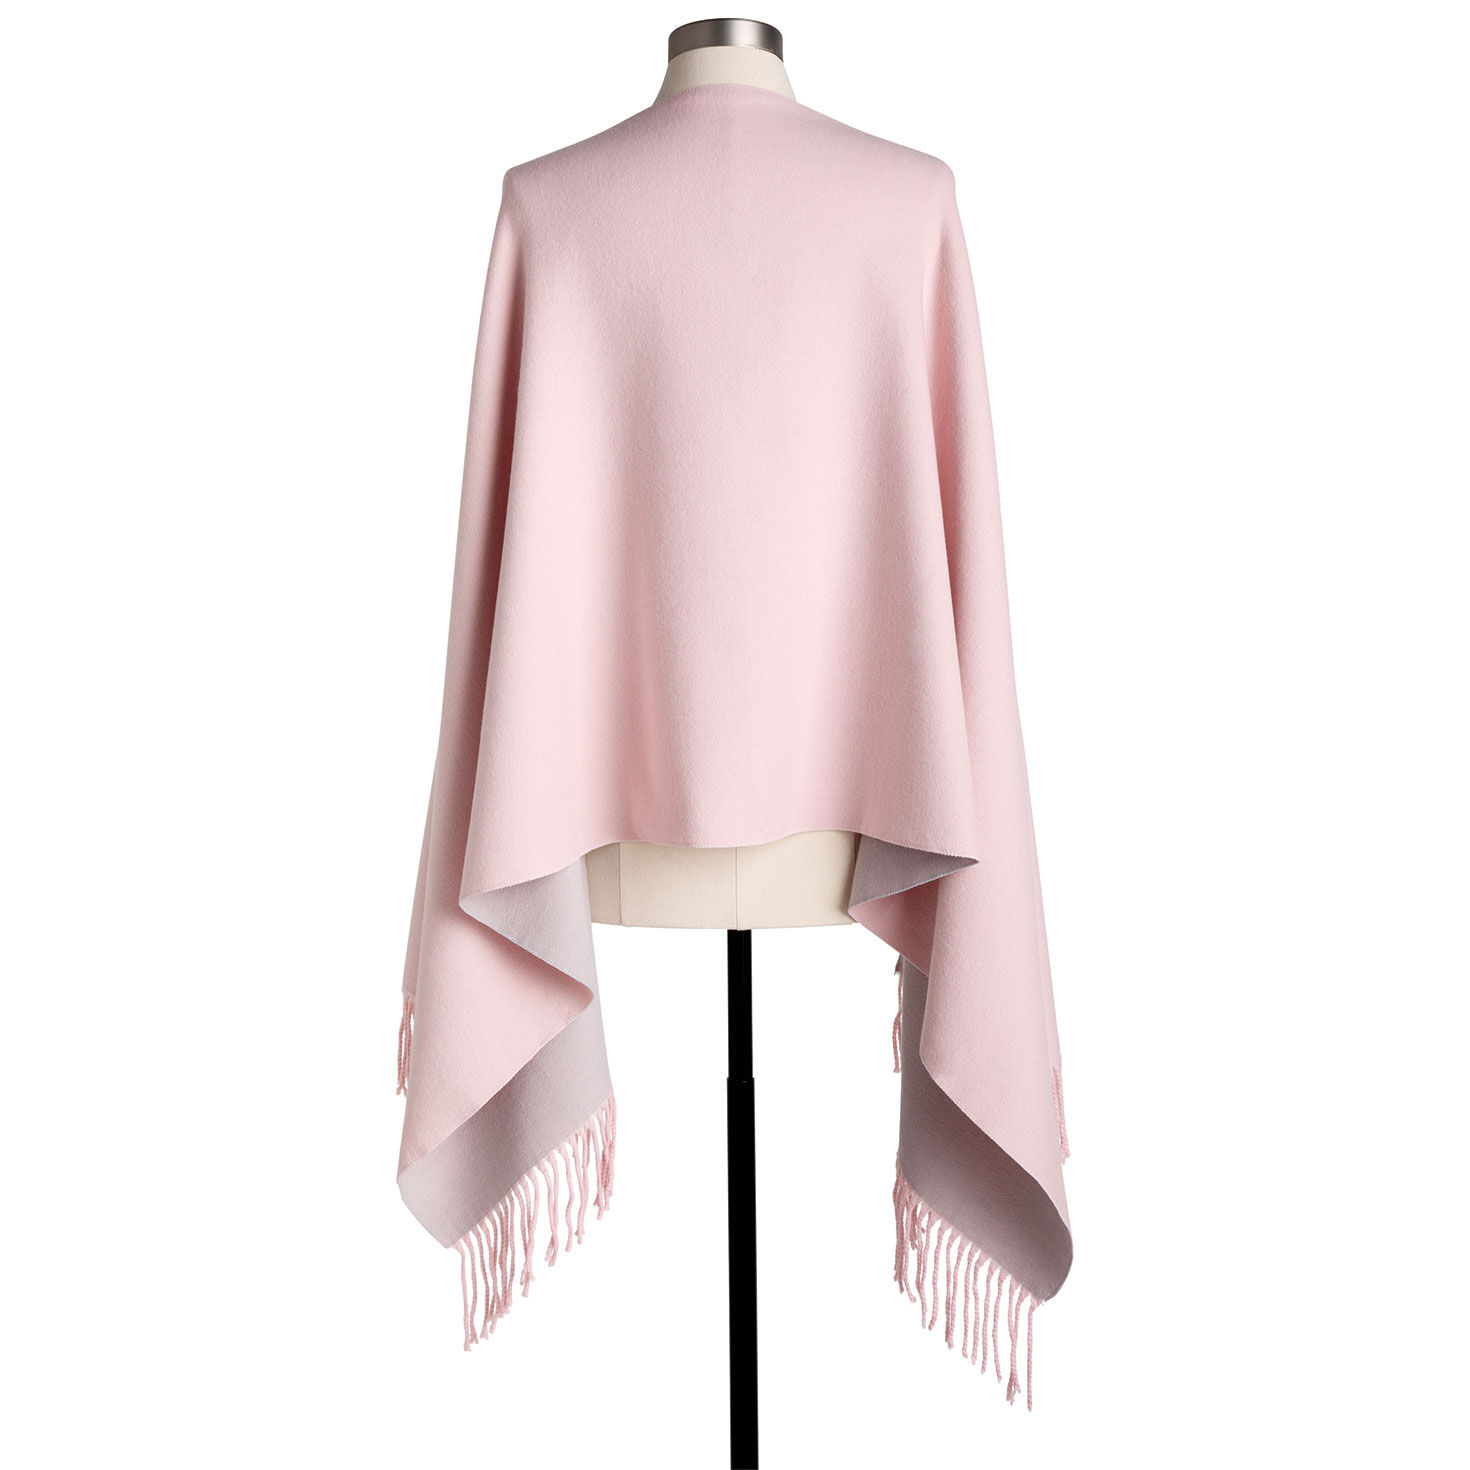 Demdaco Pale Pink Giving Wrap for only USD 39.99 | Hallmark